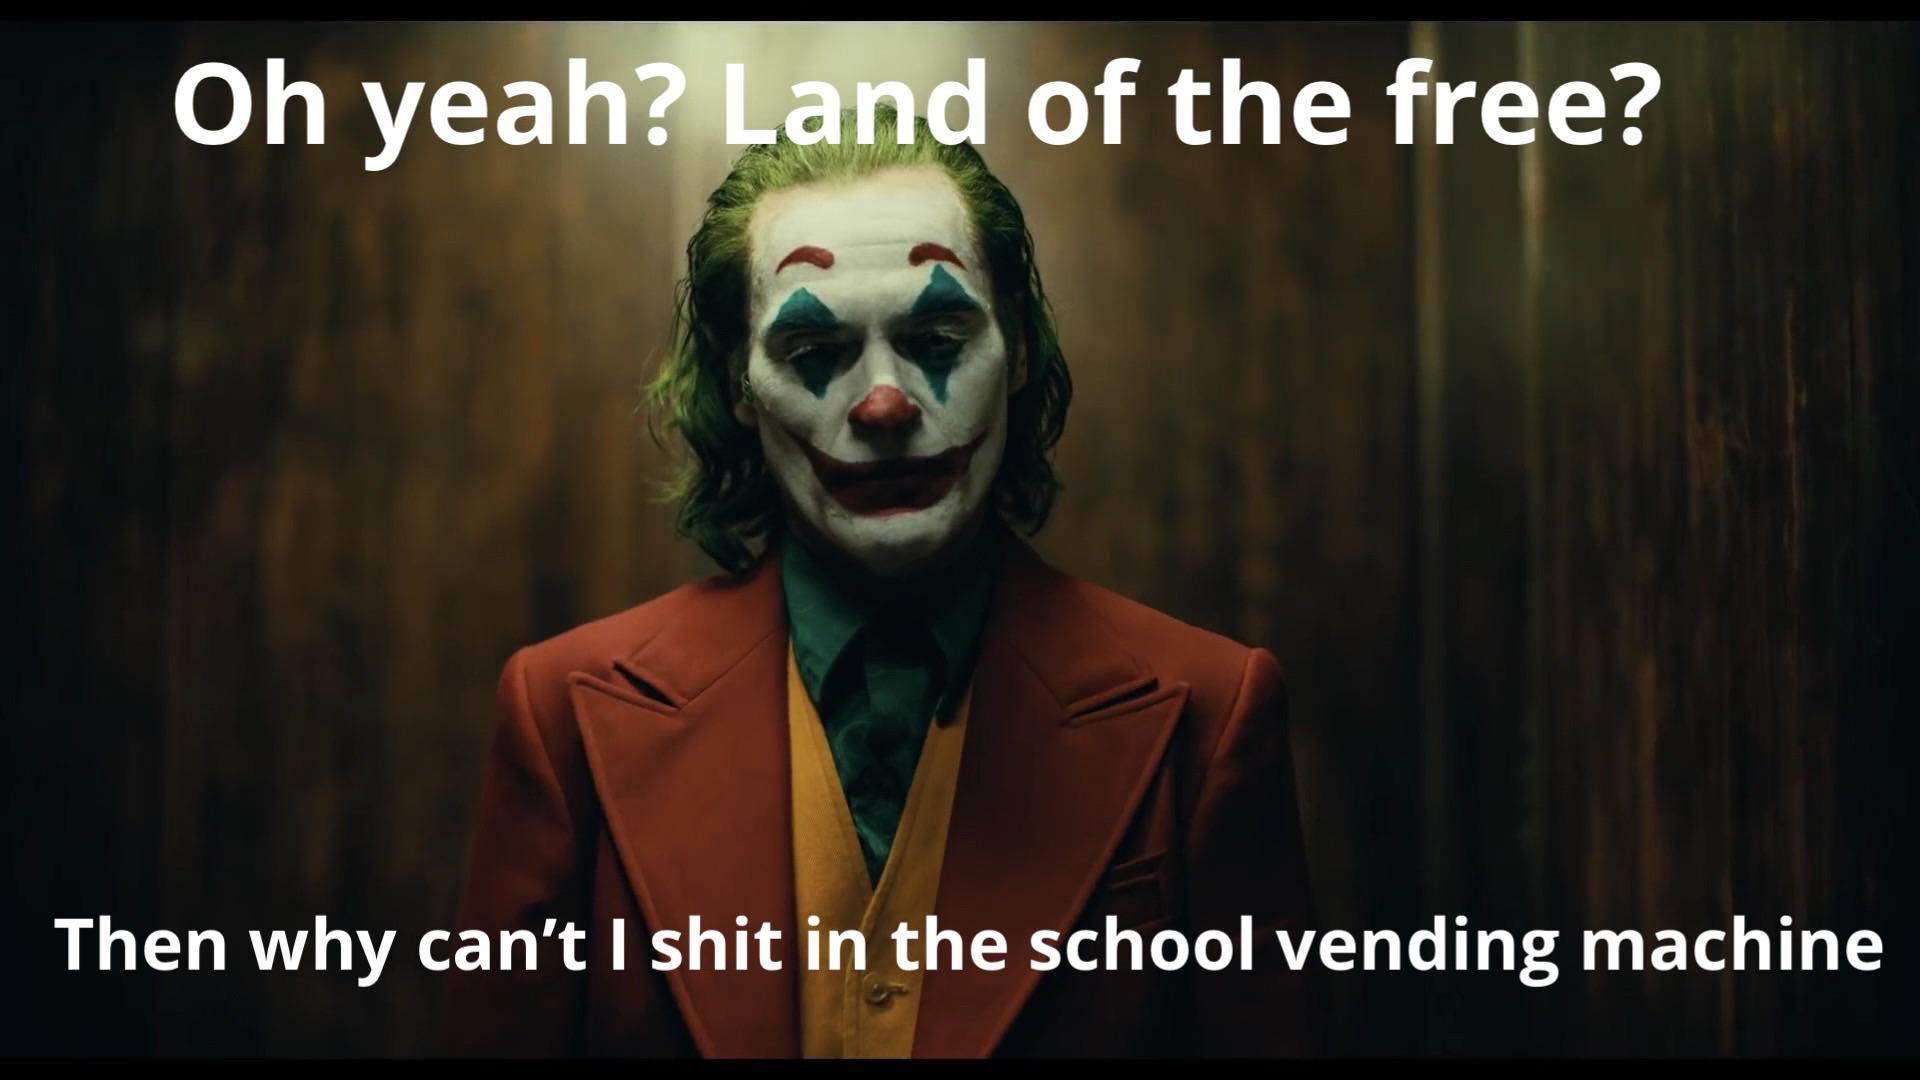 funny memes - dank memes - joker - Oh yeah? Land of the free? Then why can't I shit in the school vending machine